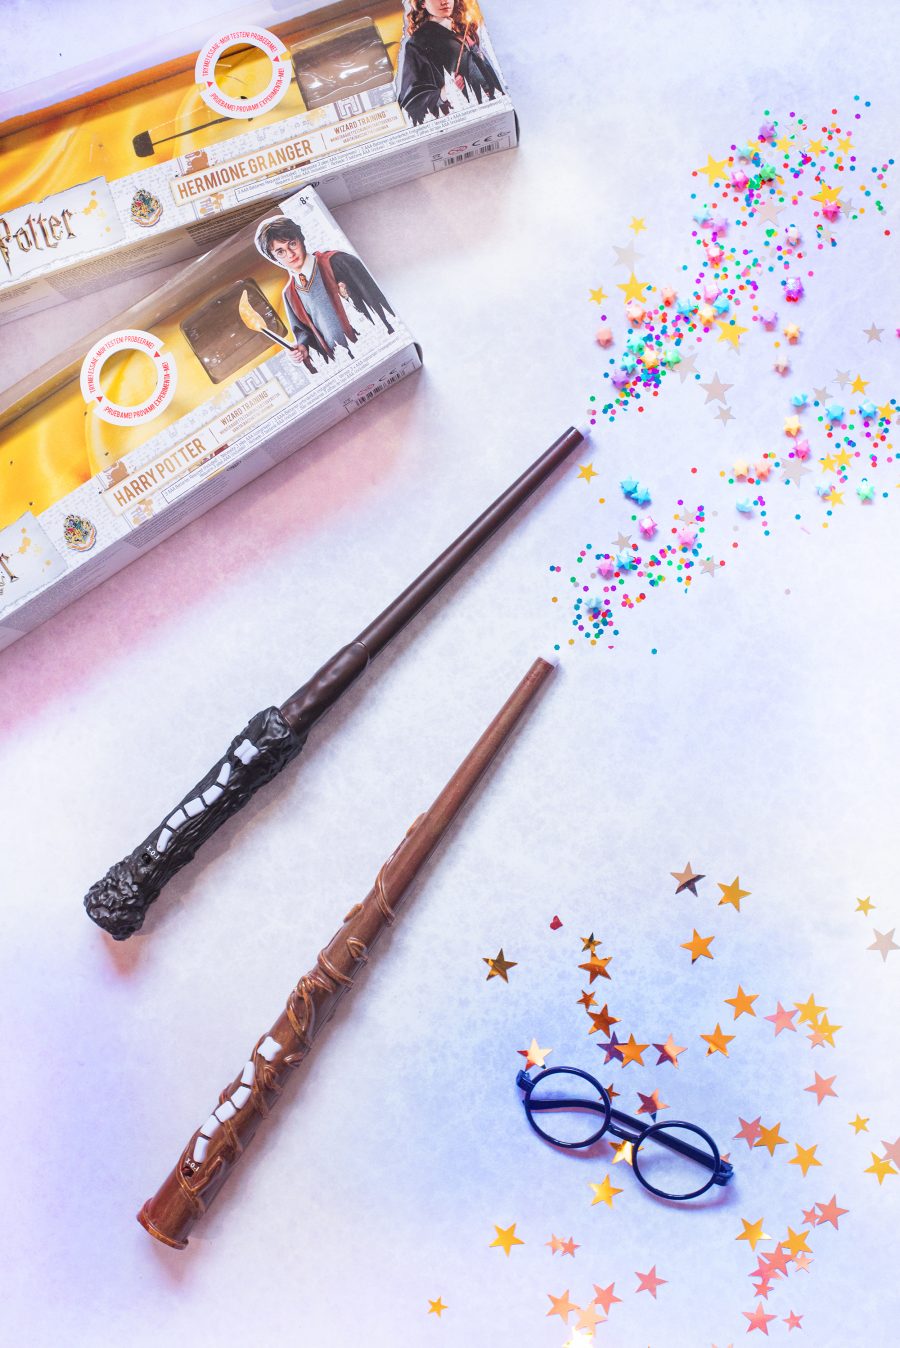 Harry Potter Wizard Training Wands